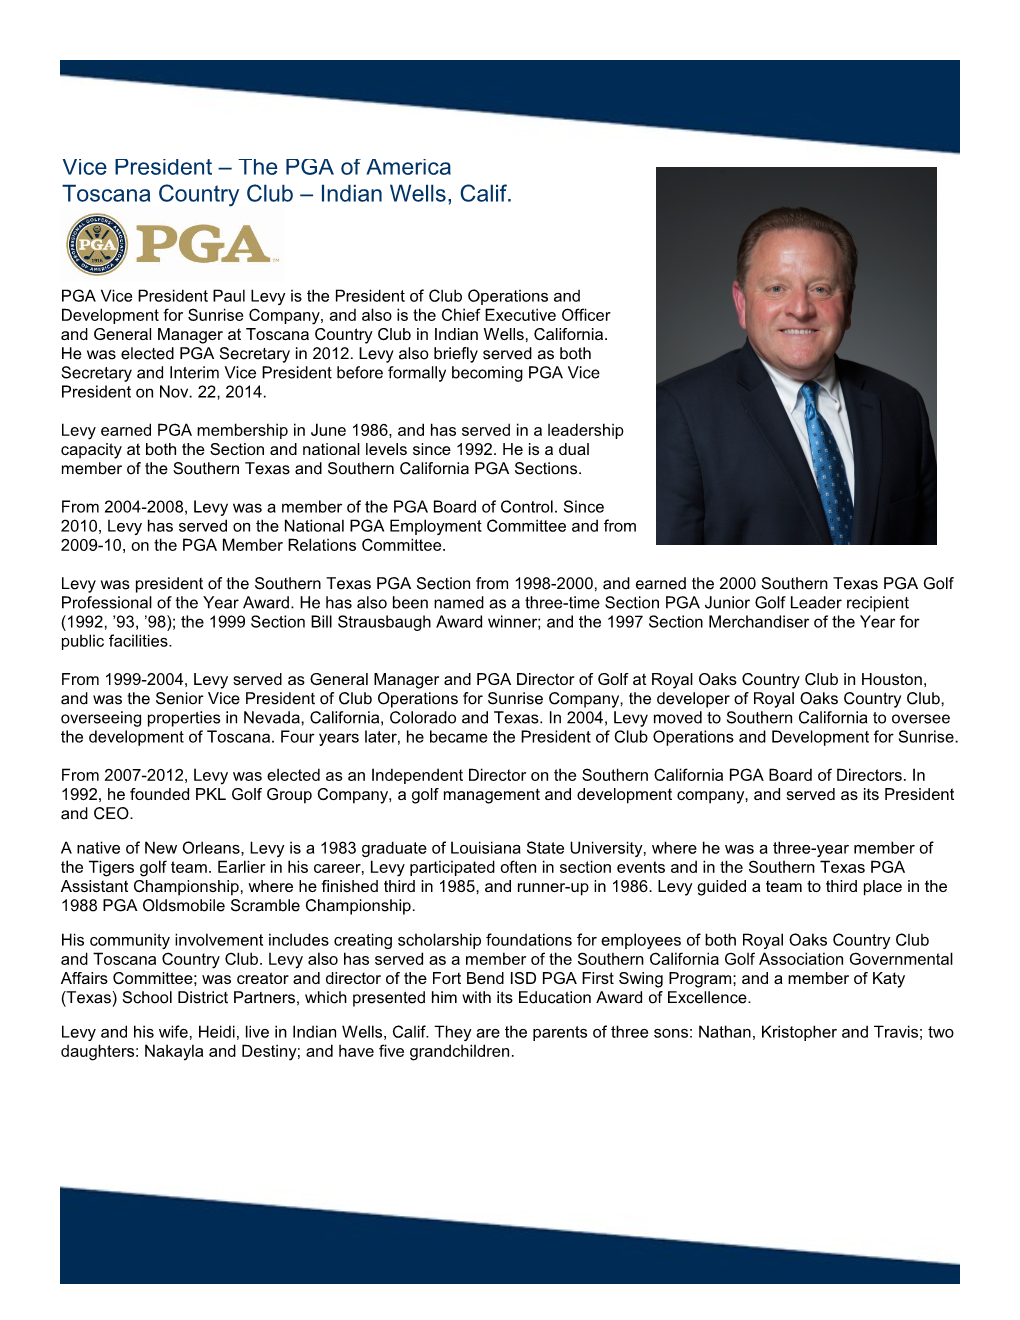 PGA Vice President Paul Levy Is the President of Club Operations and Development for Sunrise